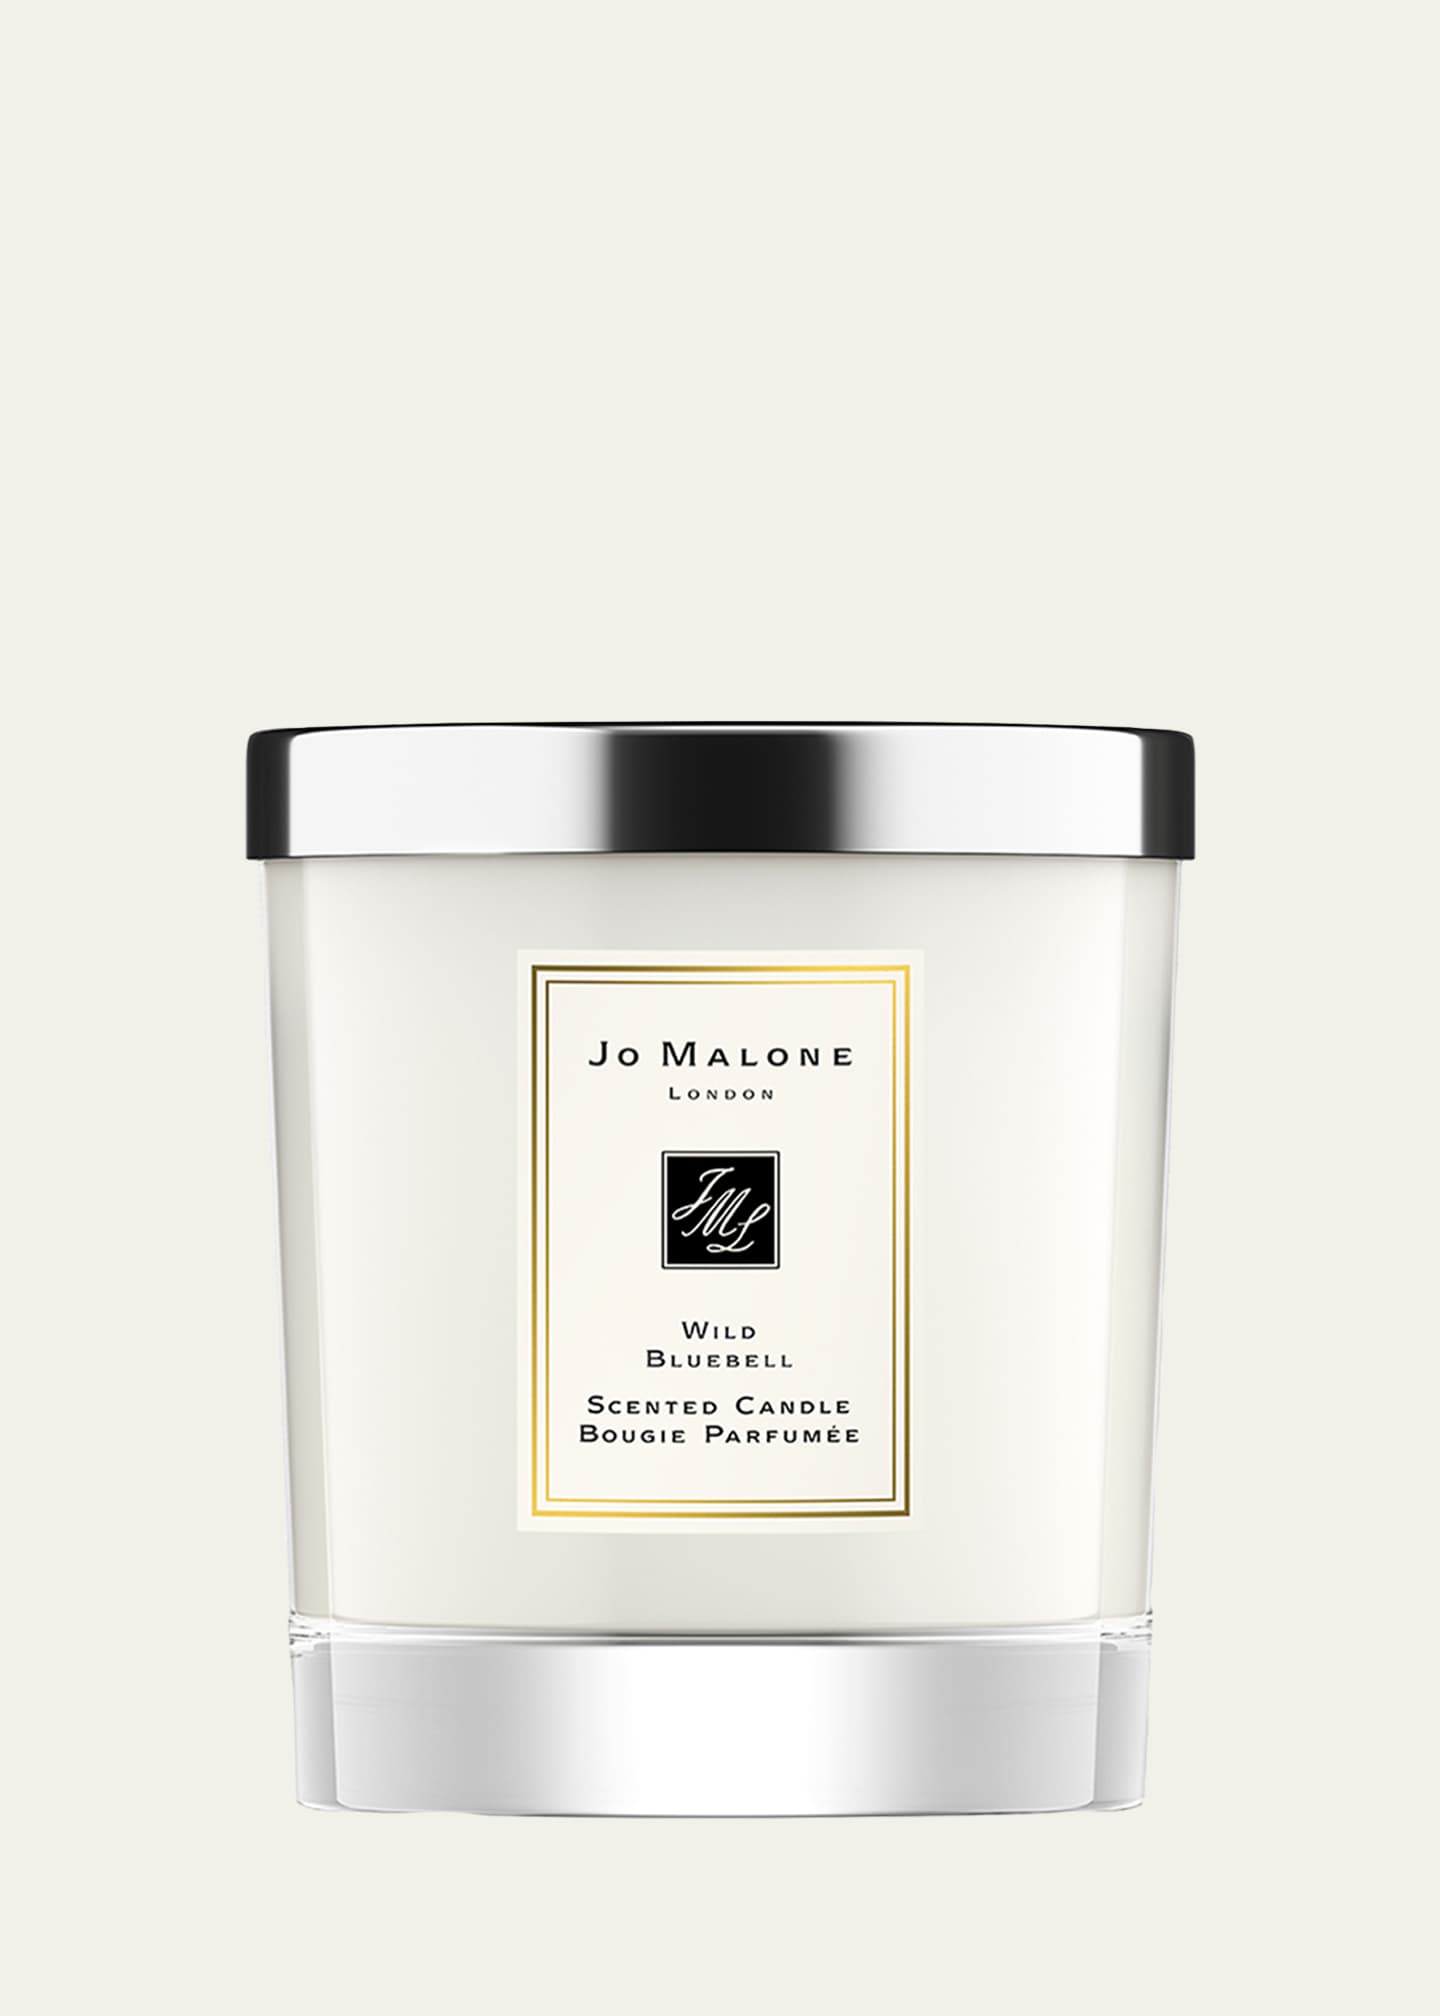 Jo Malone London Wild Bluebell Home Candle Image 2 of 4